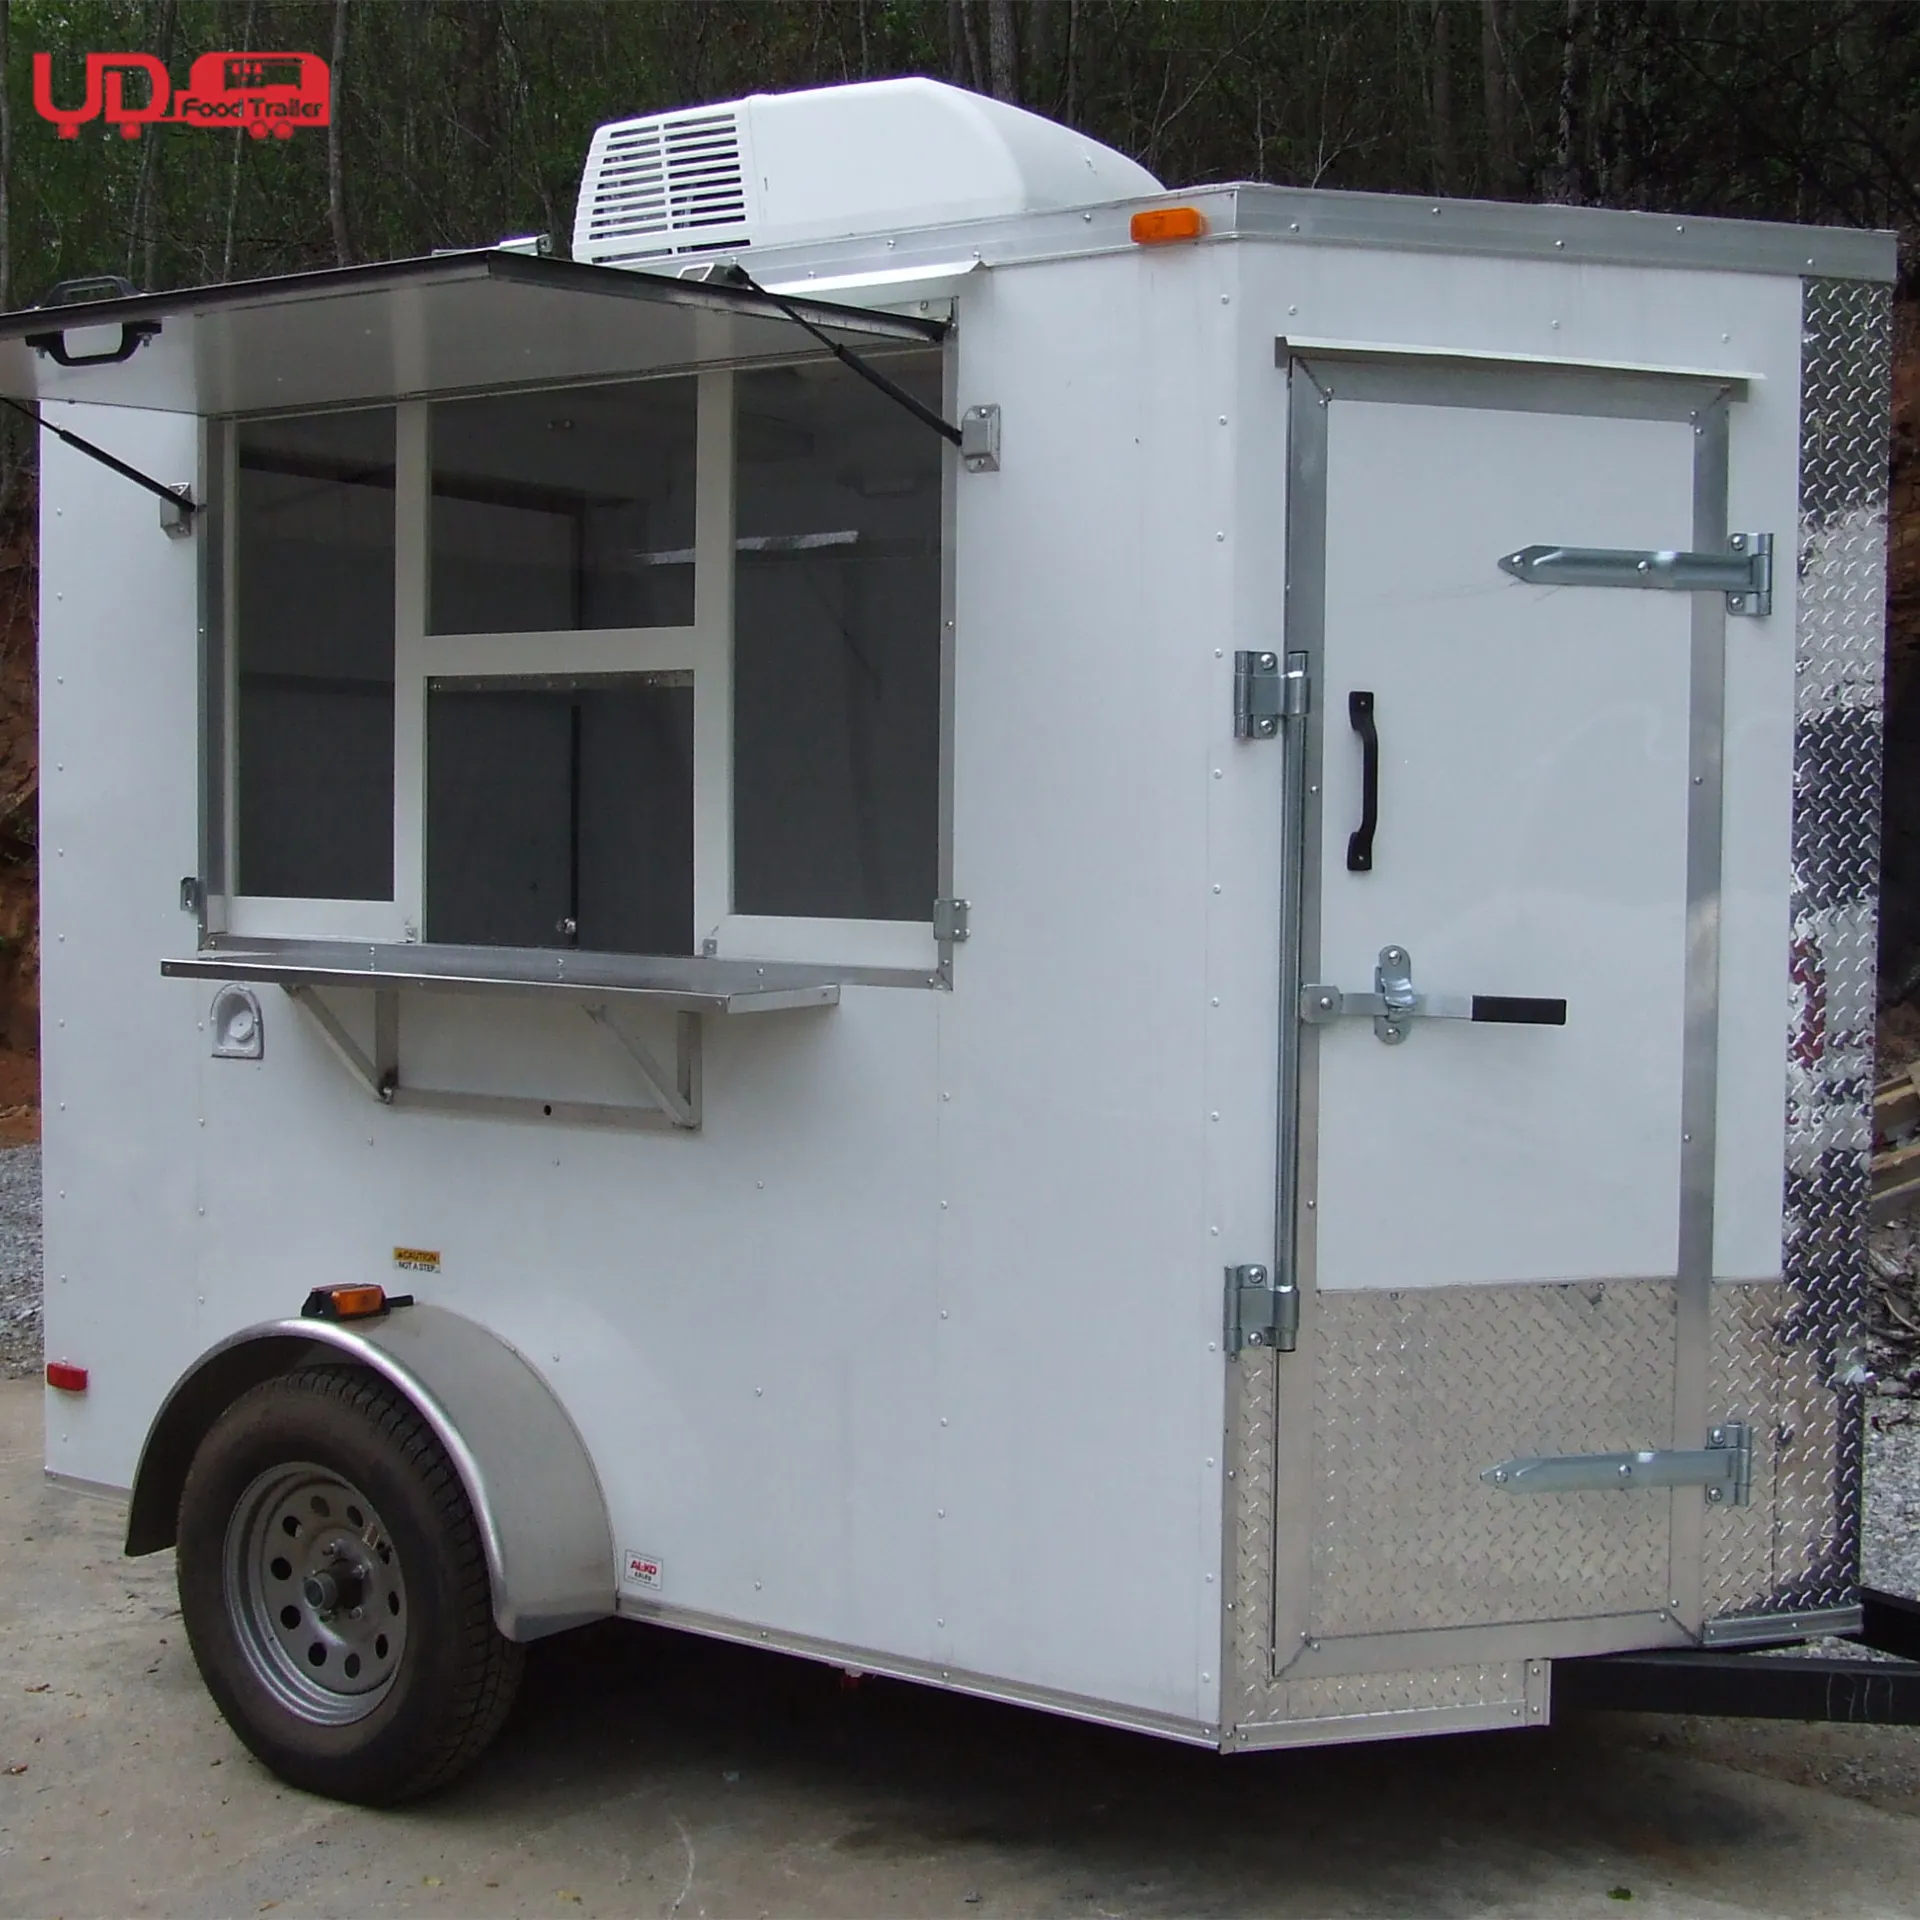 Factory Made Electric Powered Mobile Tuk Tuk Tricycle Food Cart Food Truck For Sale USA